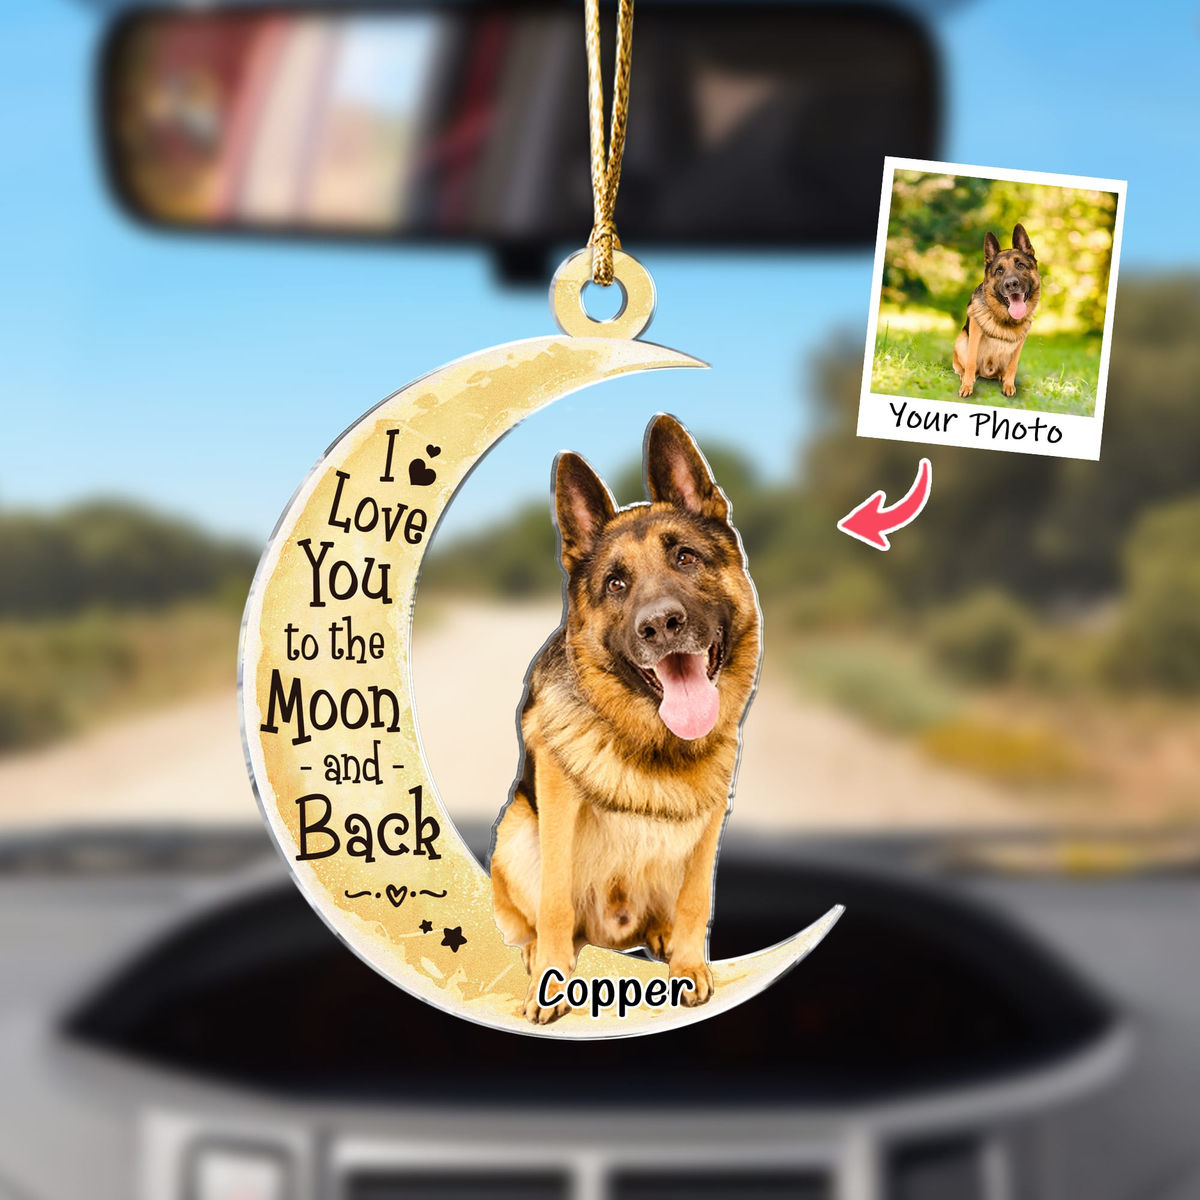 Dog Acrylic Ornament - Dog Lover Gifts -  Moon - Custom Ornament from Photo - Christmas Gifts, Custom Photo Gifts